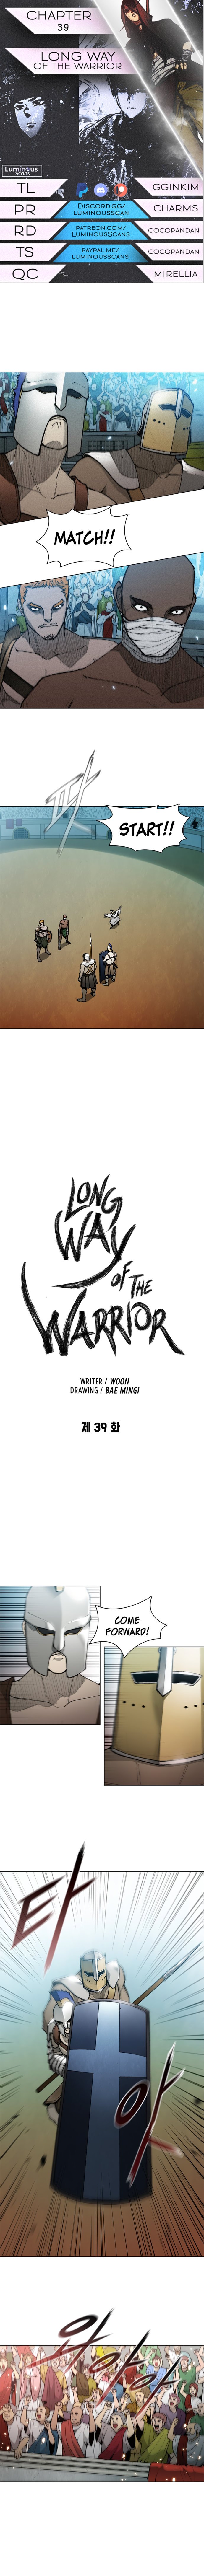 long-way-of-the-warrior-chap-39-0